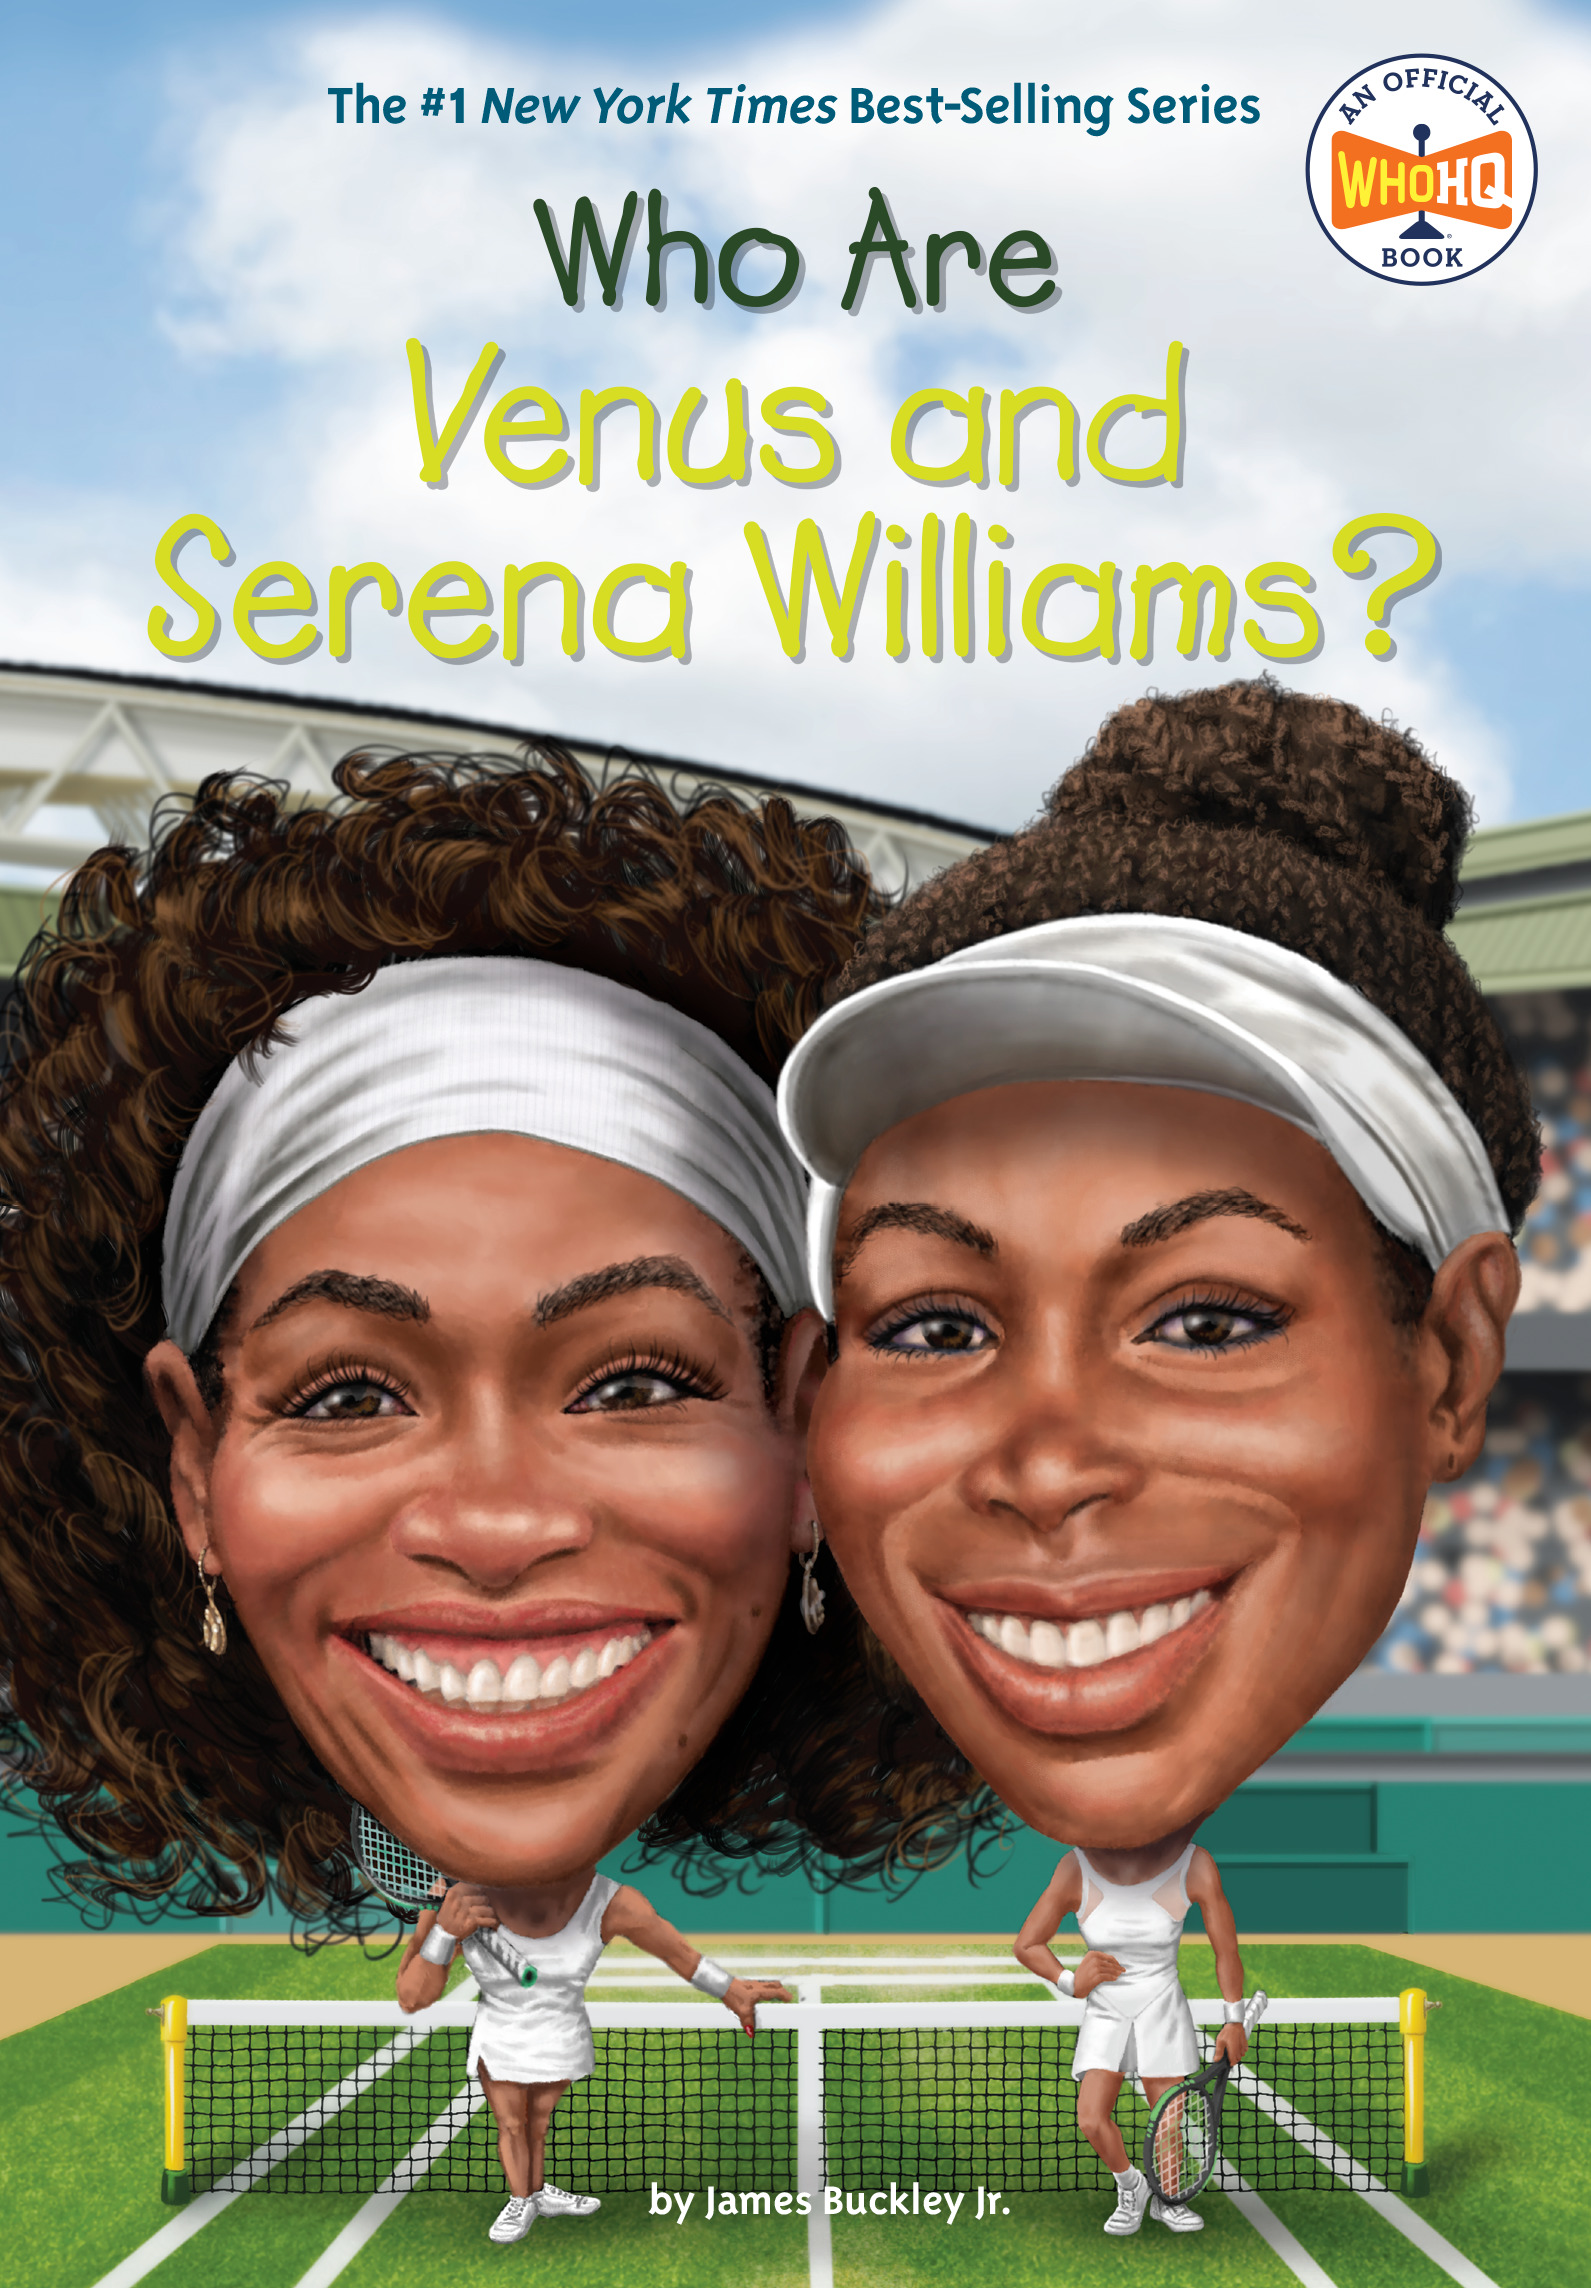 Who Are Venus and Serena Williams? | Buckley, James (Auteur) | Thomson, Andrew (Illustrateur)